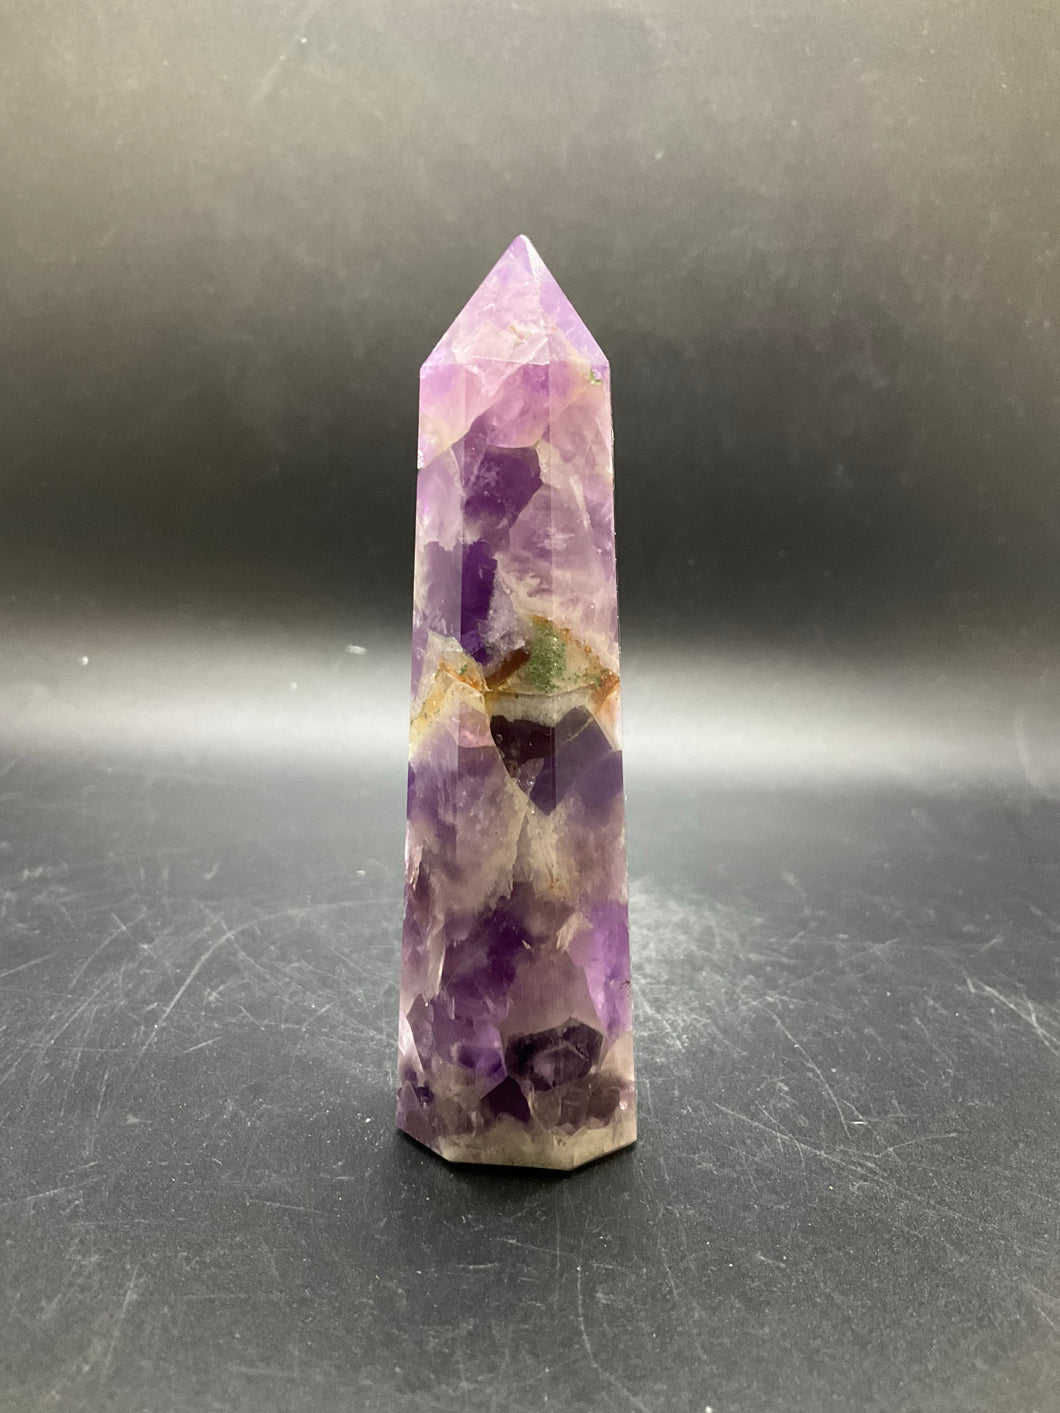 Dogtooth Amethyst Point